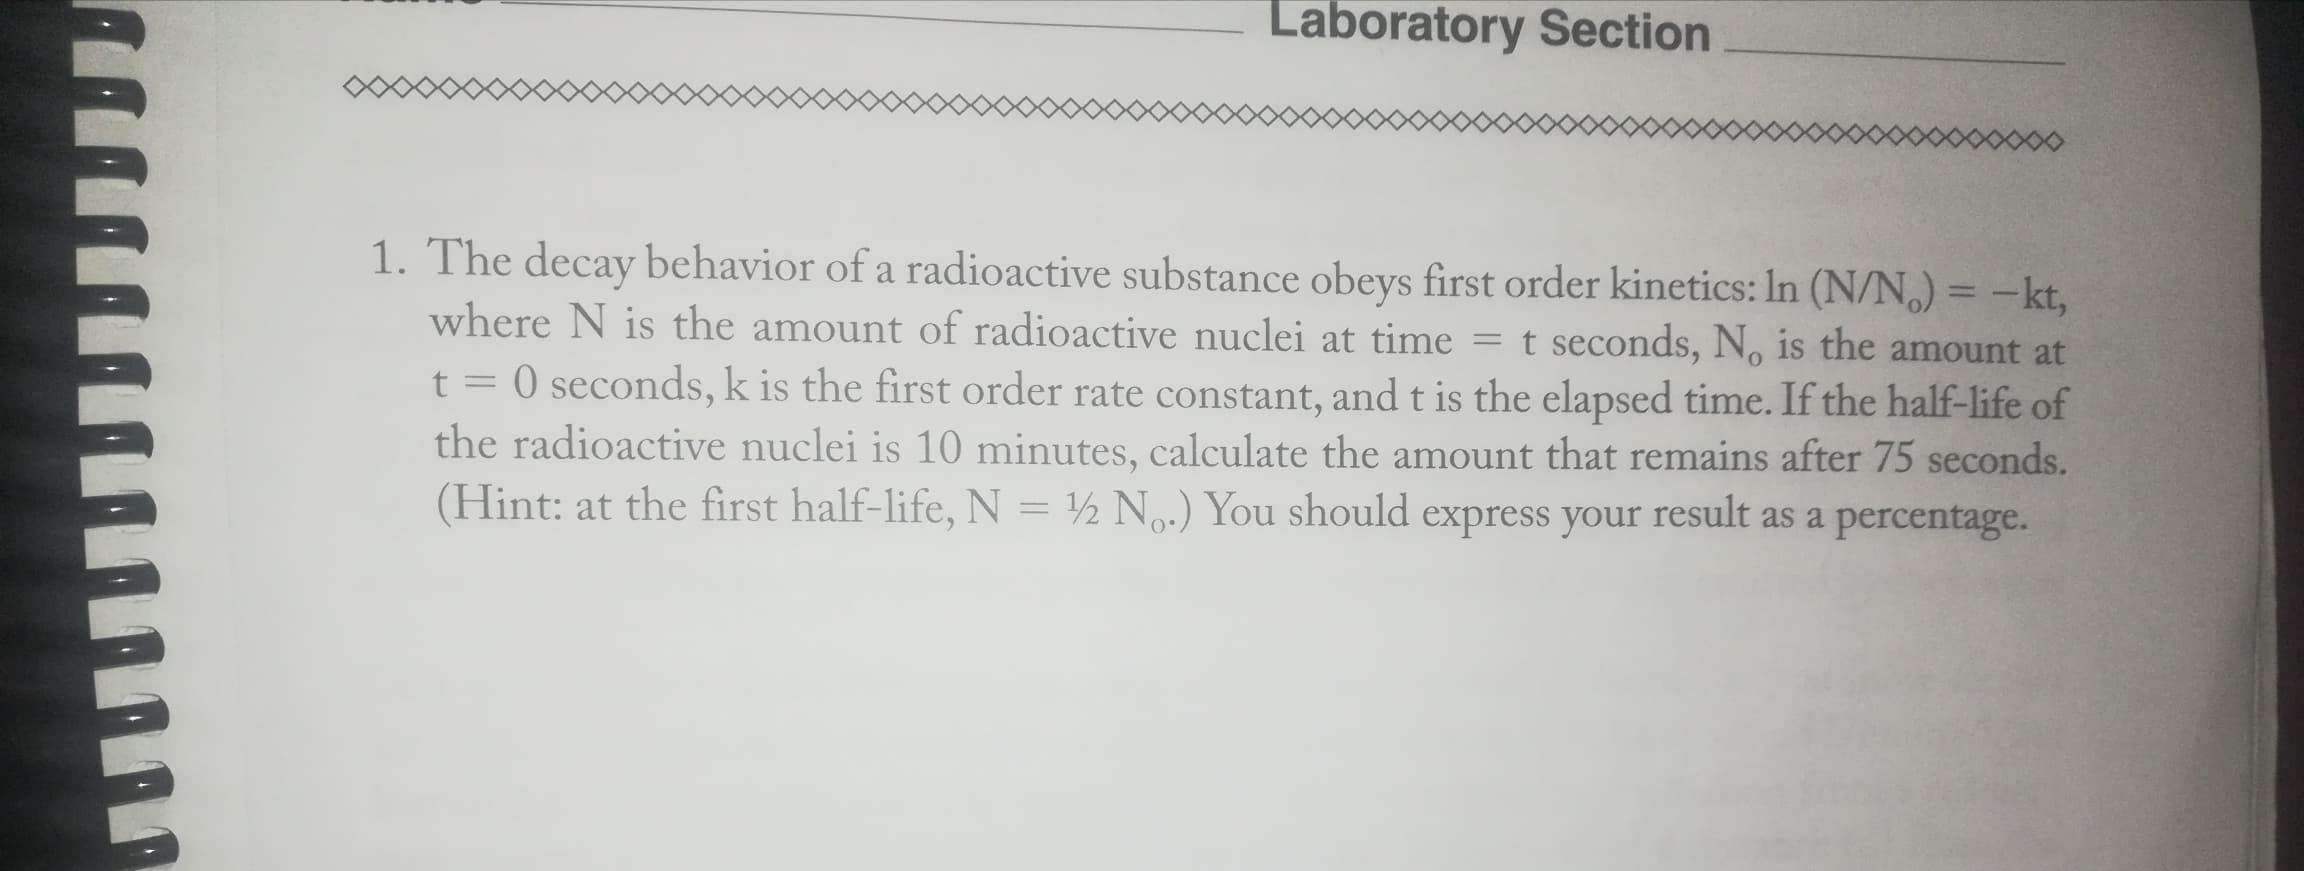 The decay behavior of a radioactive substance obeys first order kinetics: In (N/N,) = -kt,
where N is the amount of radioactive nuclei at time = t seconds, N, is the amount at
O seconds, k is the first order rate constant, and t is the elapsed time. If the half-life of
the radioactive nuclei is 10 minutes, calculate the amount that remains after 75 seconds.
(Hint: at the first half-life, N = ½ N.) You should express your result as a percentage.
